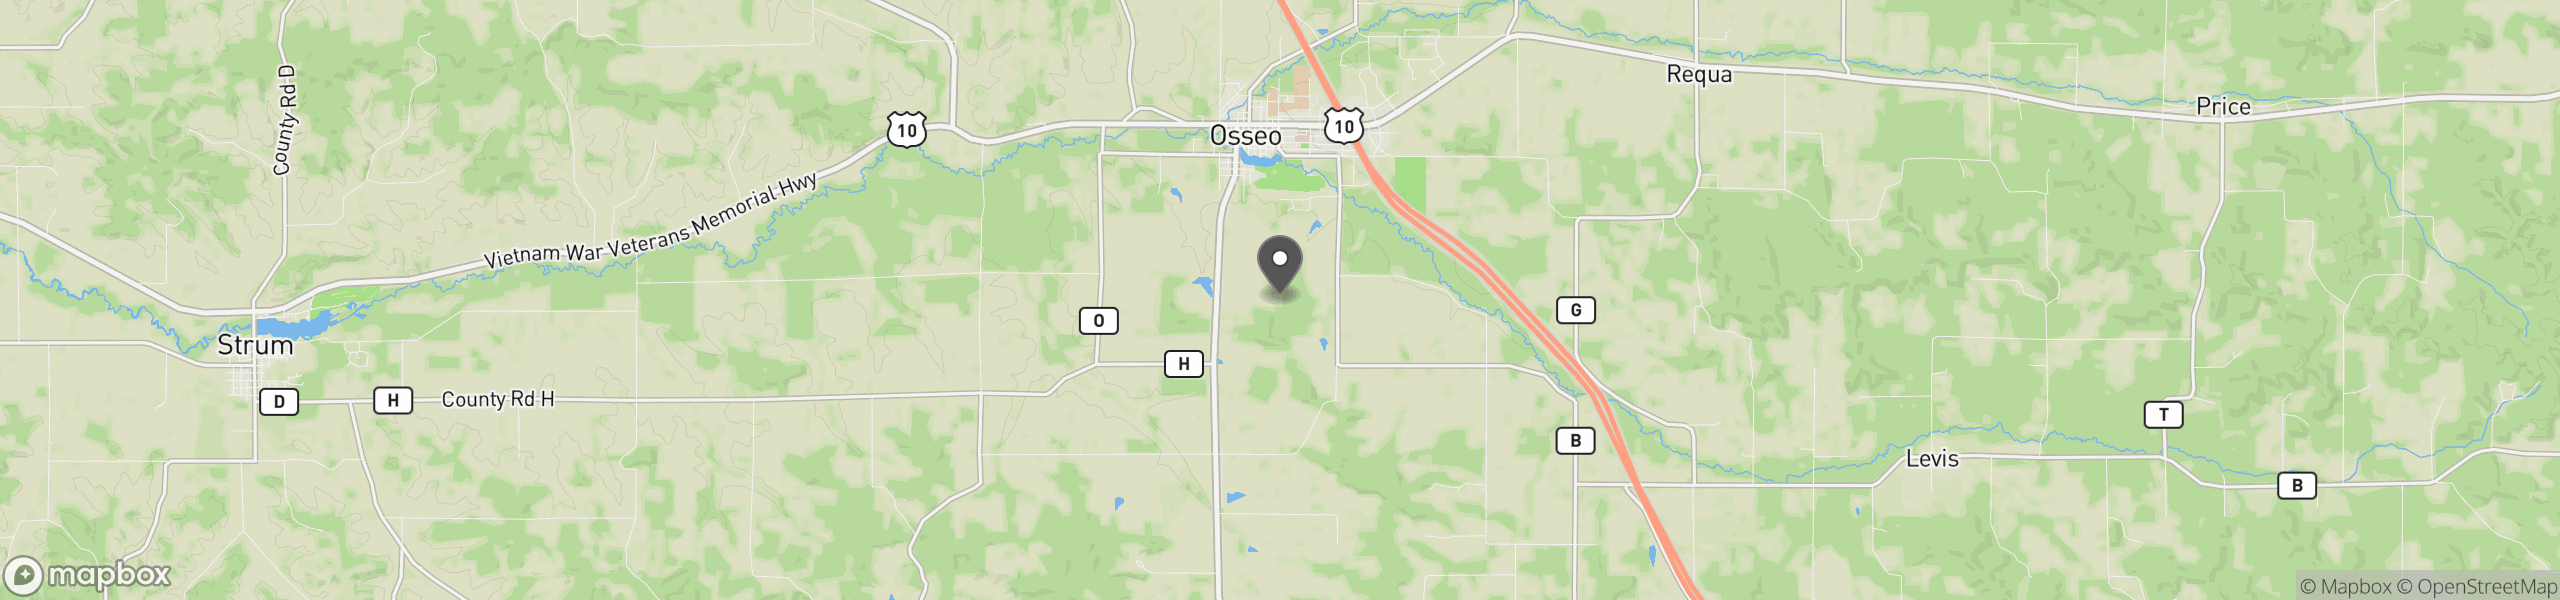 Osseo, WI 54758